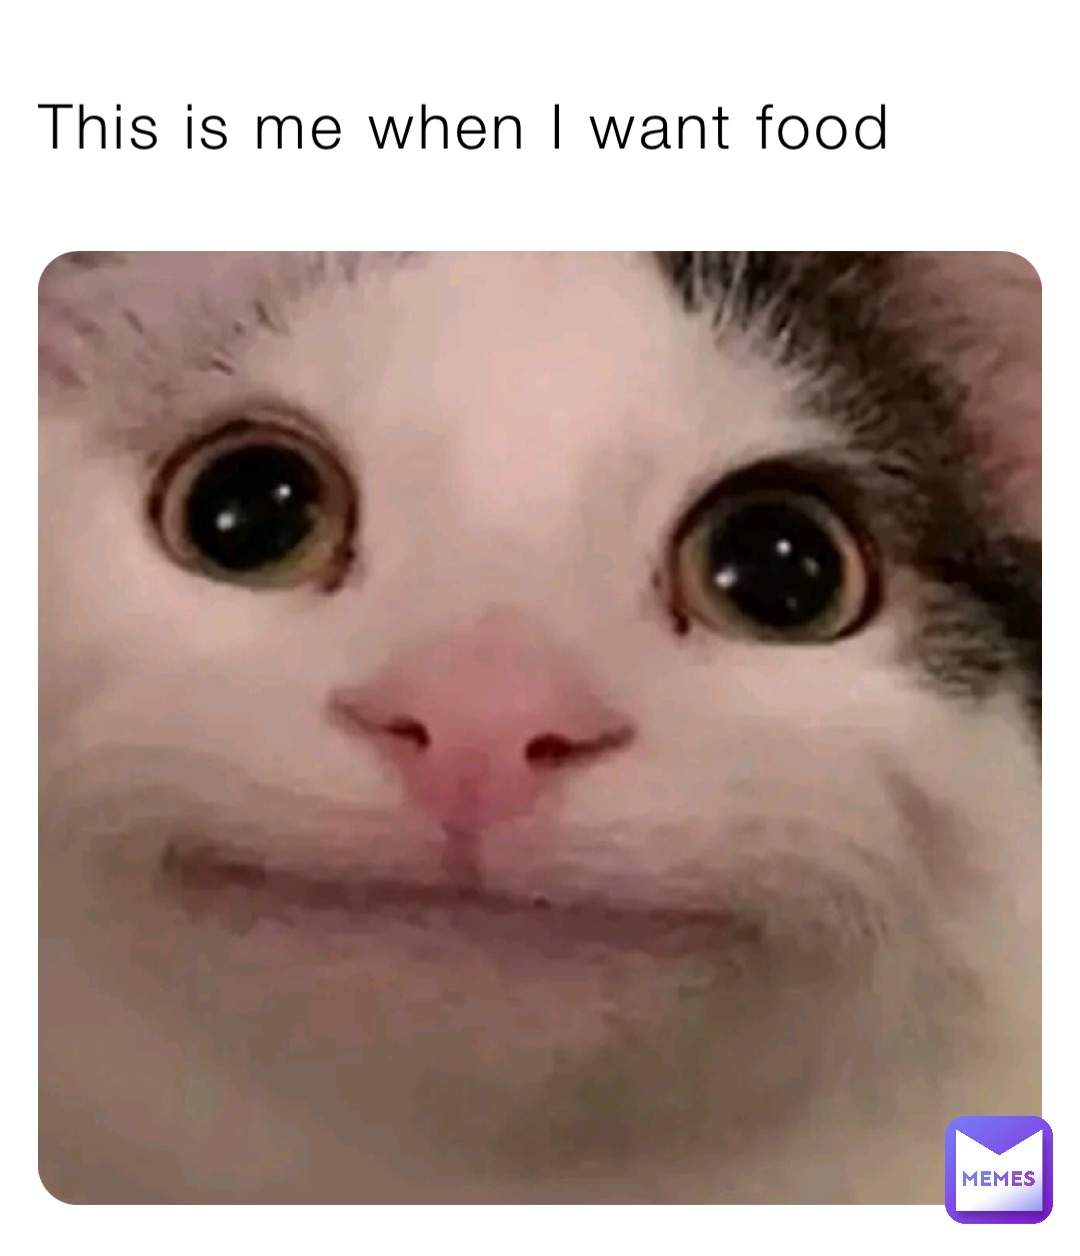 This is me when I want food